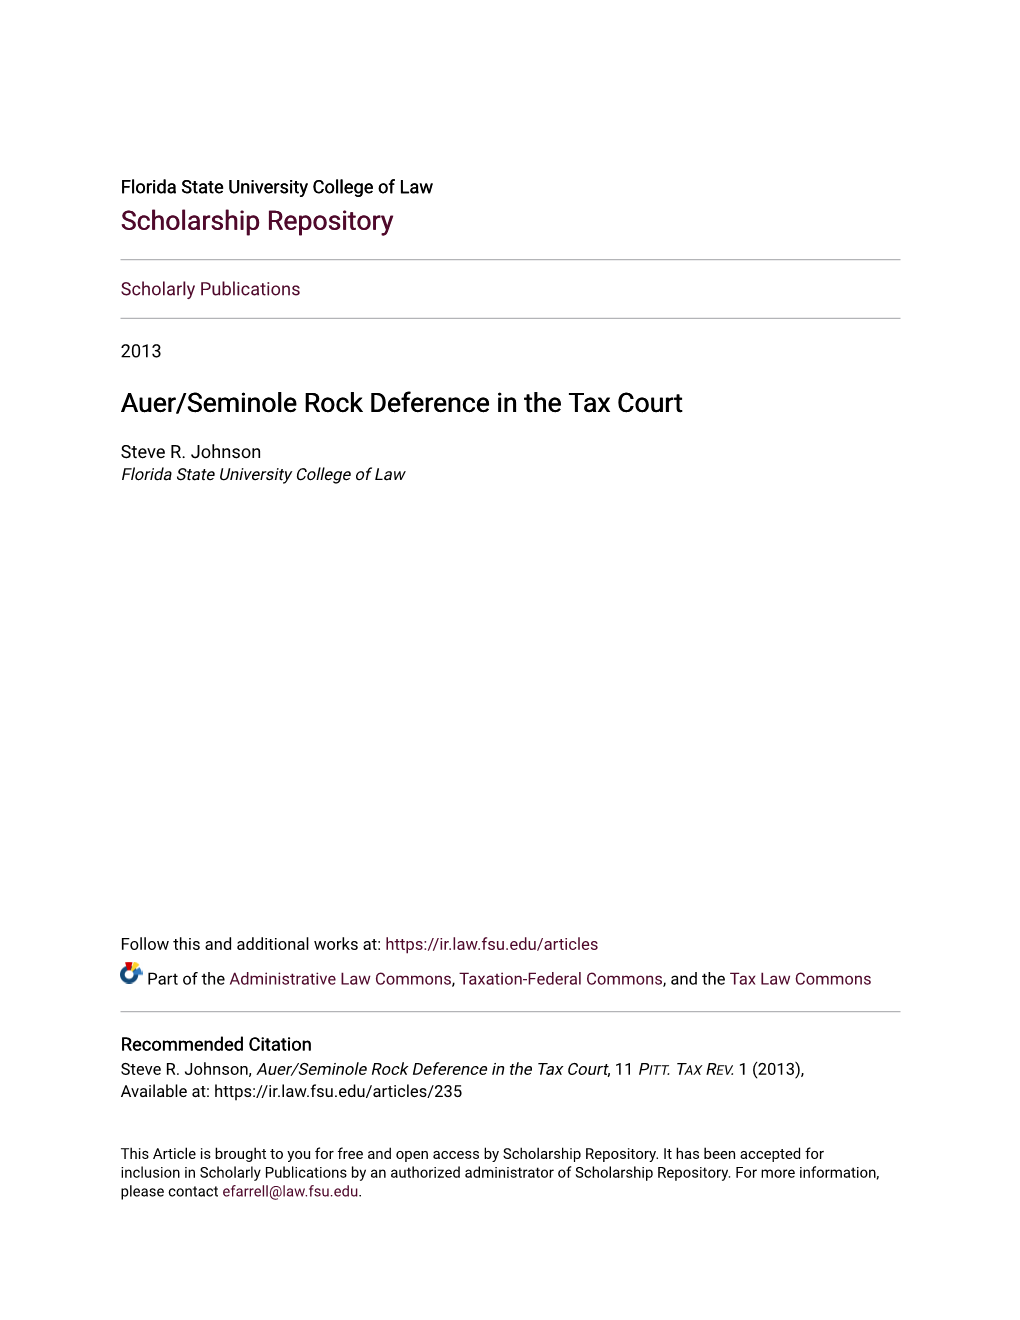 Auer/Seminole Rock Deference in the Tax Court